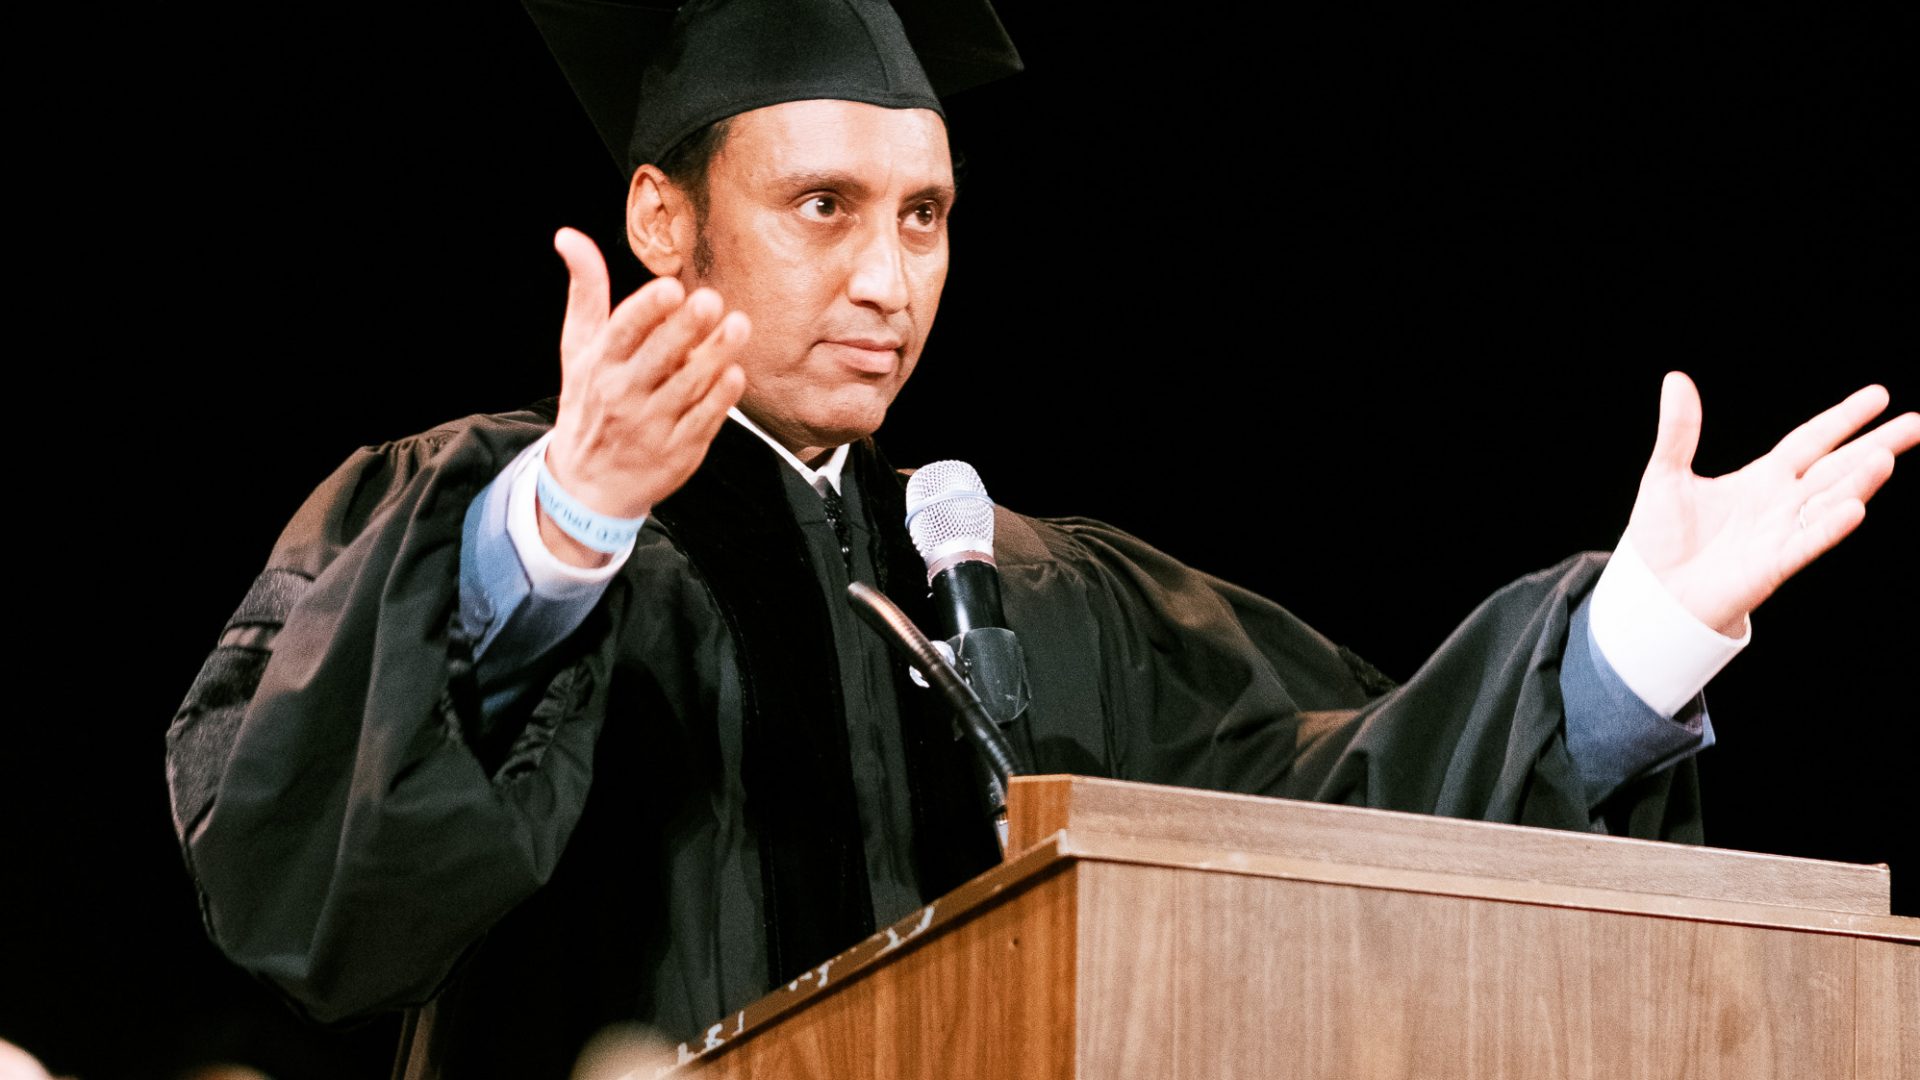 Aasif Mandvi addresses the Class of 2019 at Commencement.